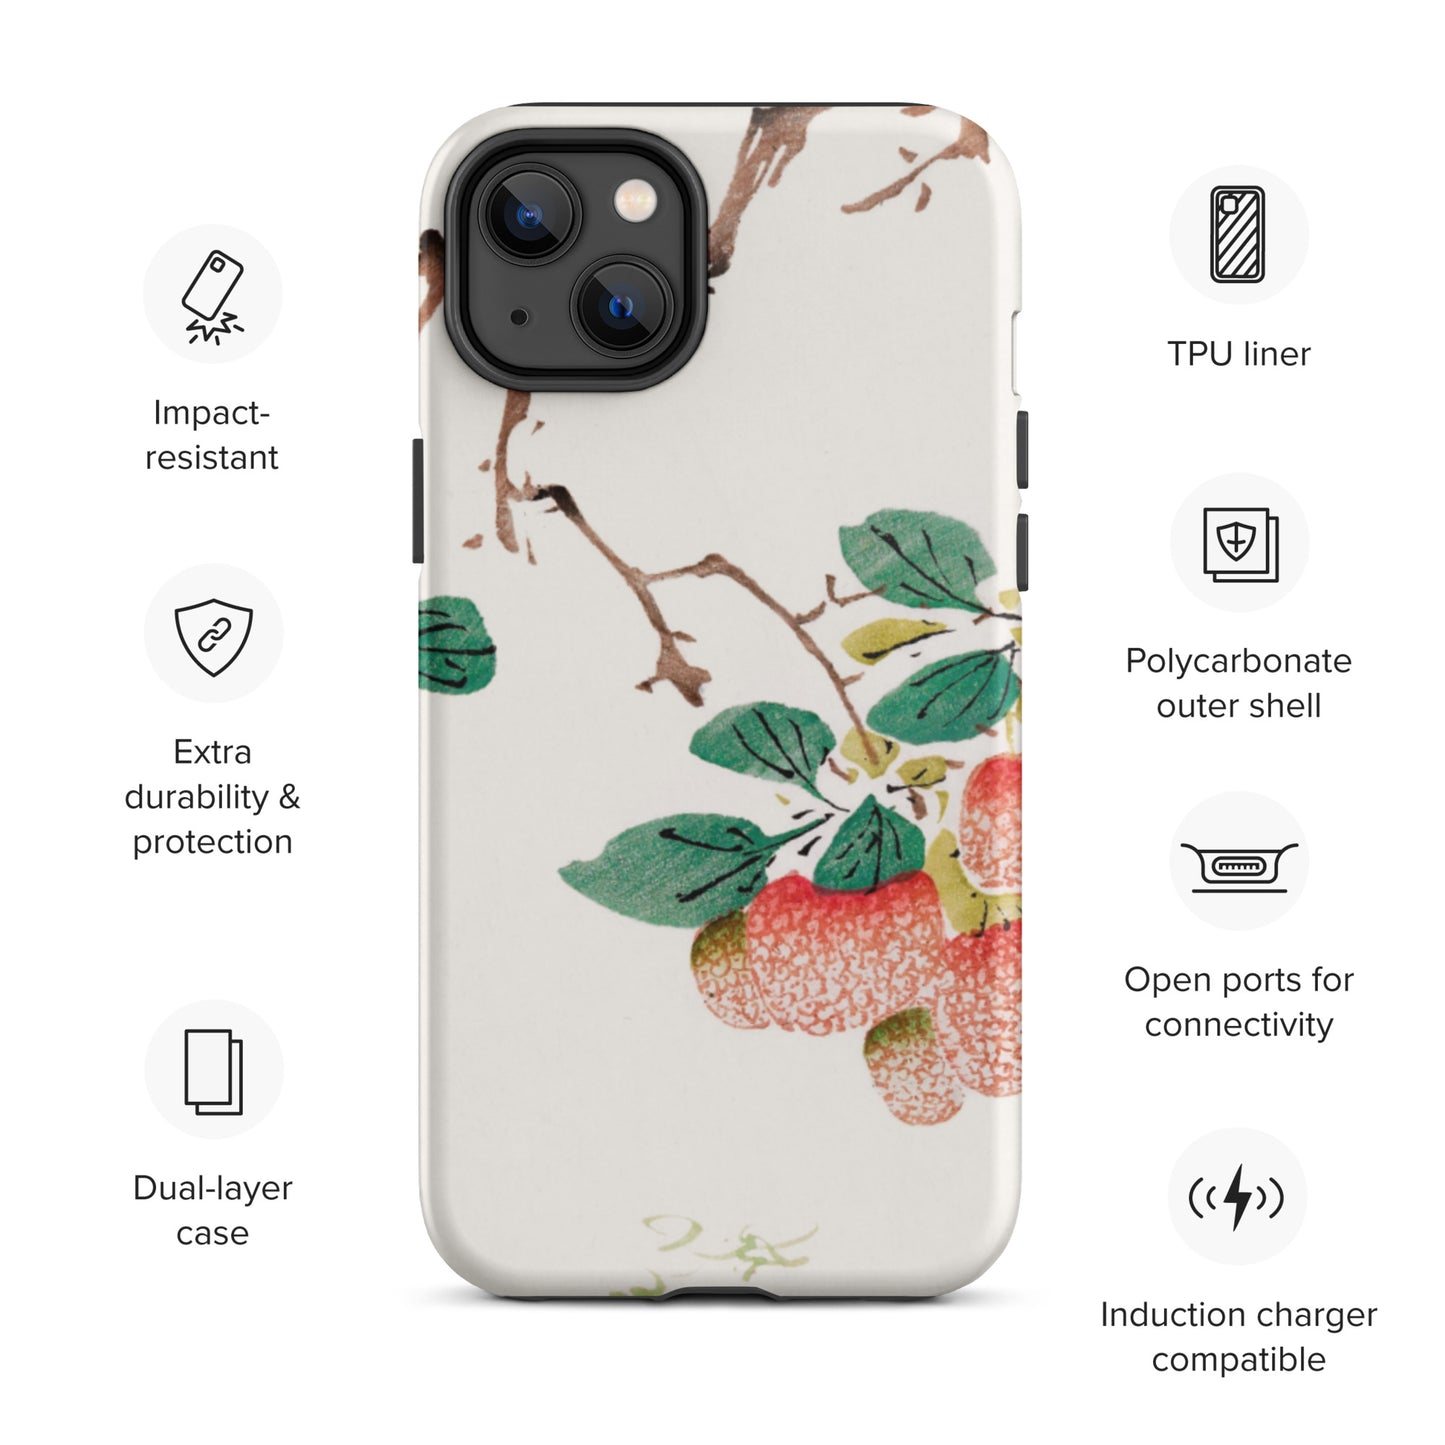 Lychee - Tough iPhone case